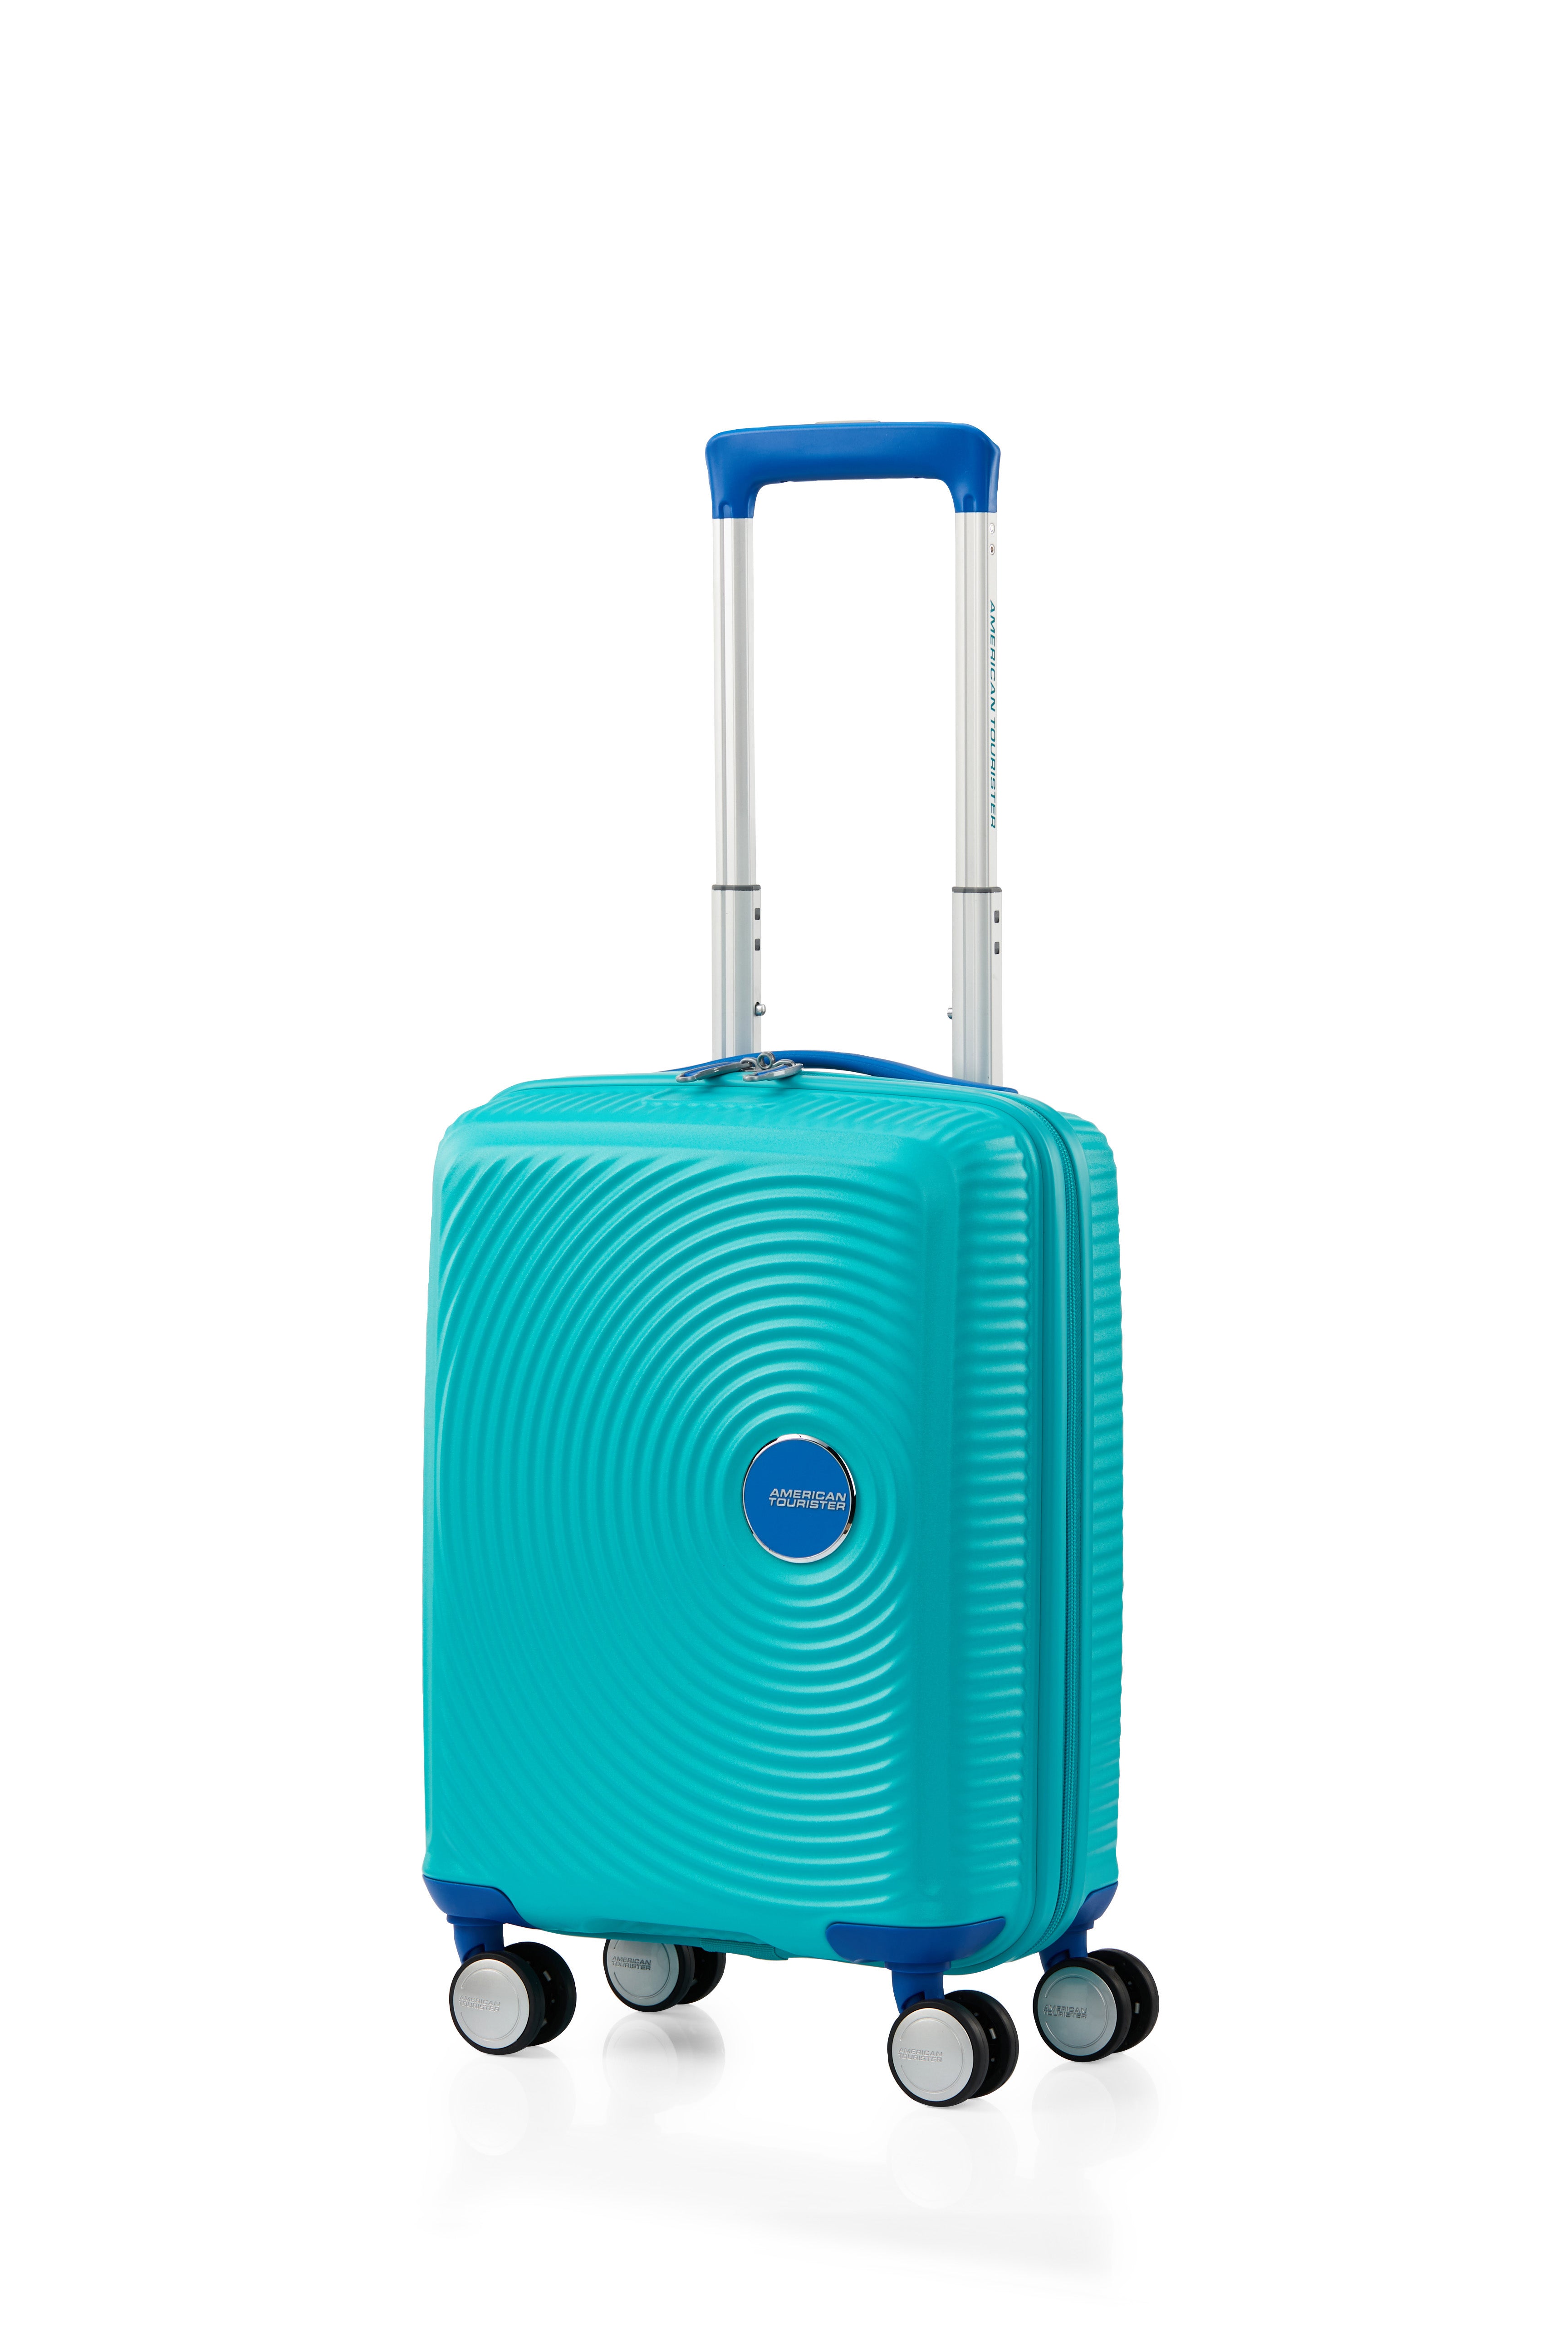 American Tourister - Little Curio 47cm Spinner - Teal/Blue-2